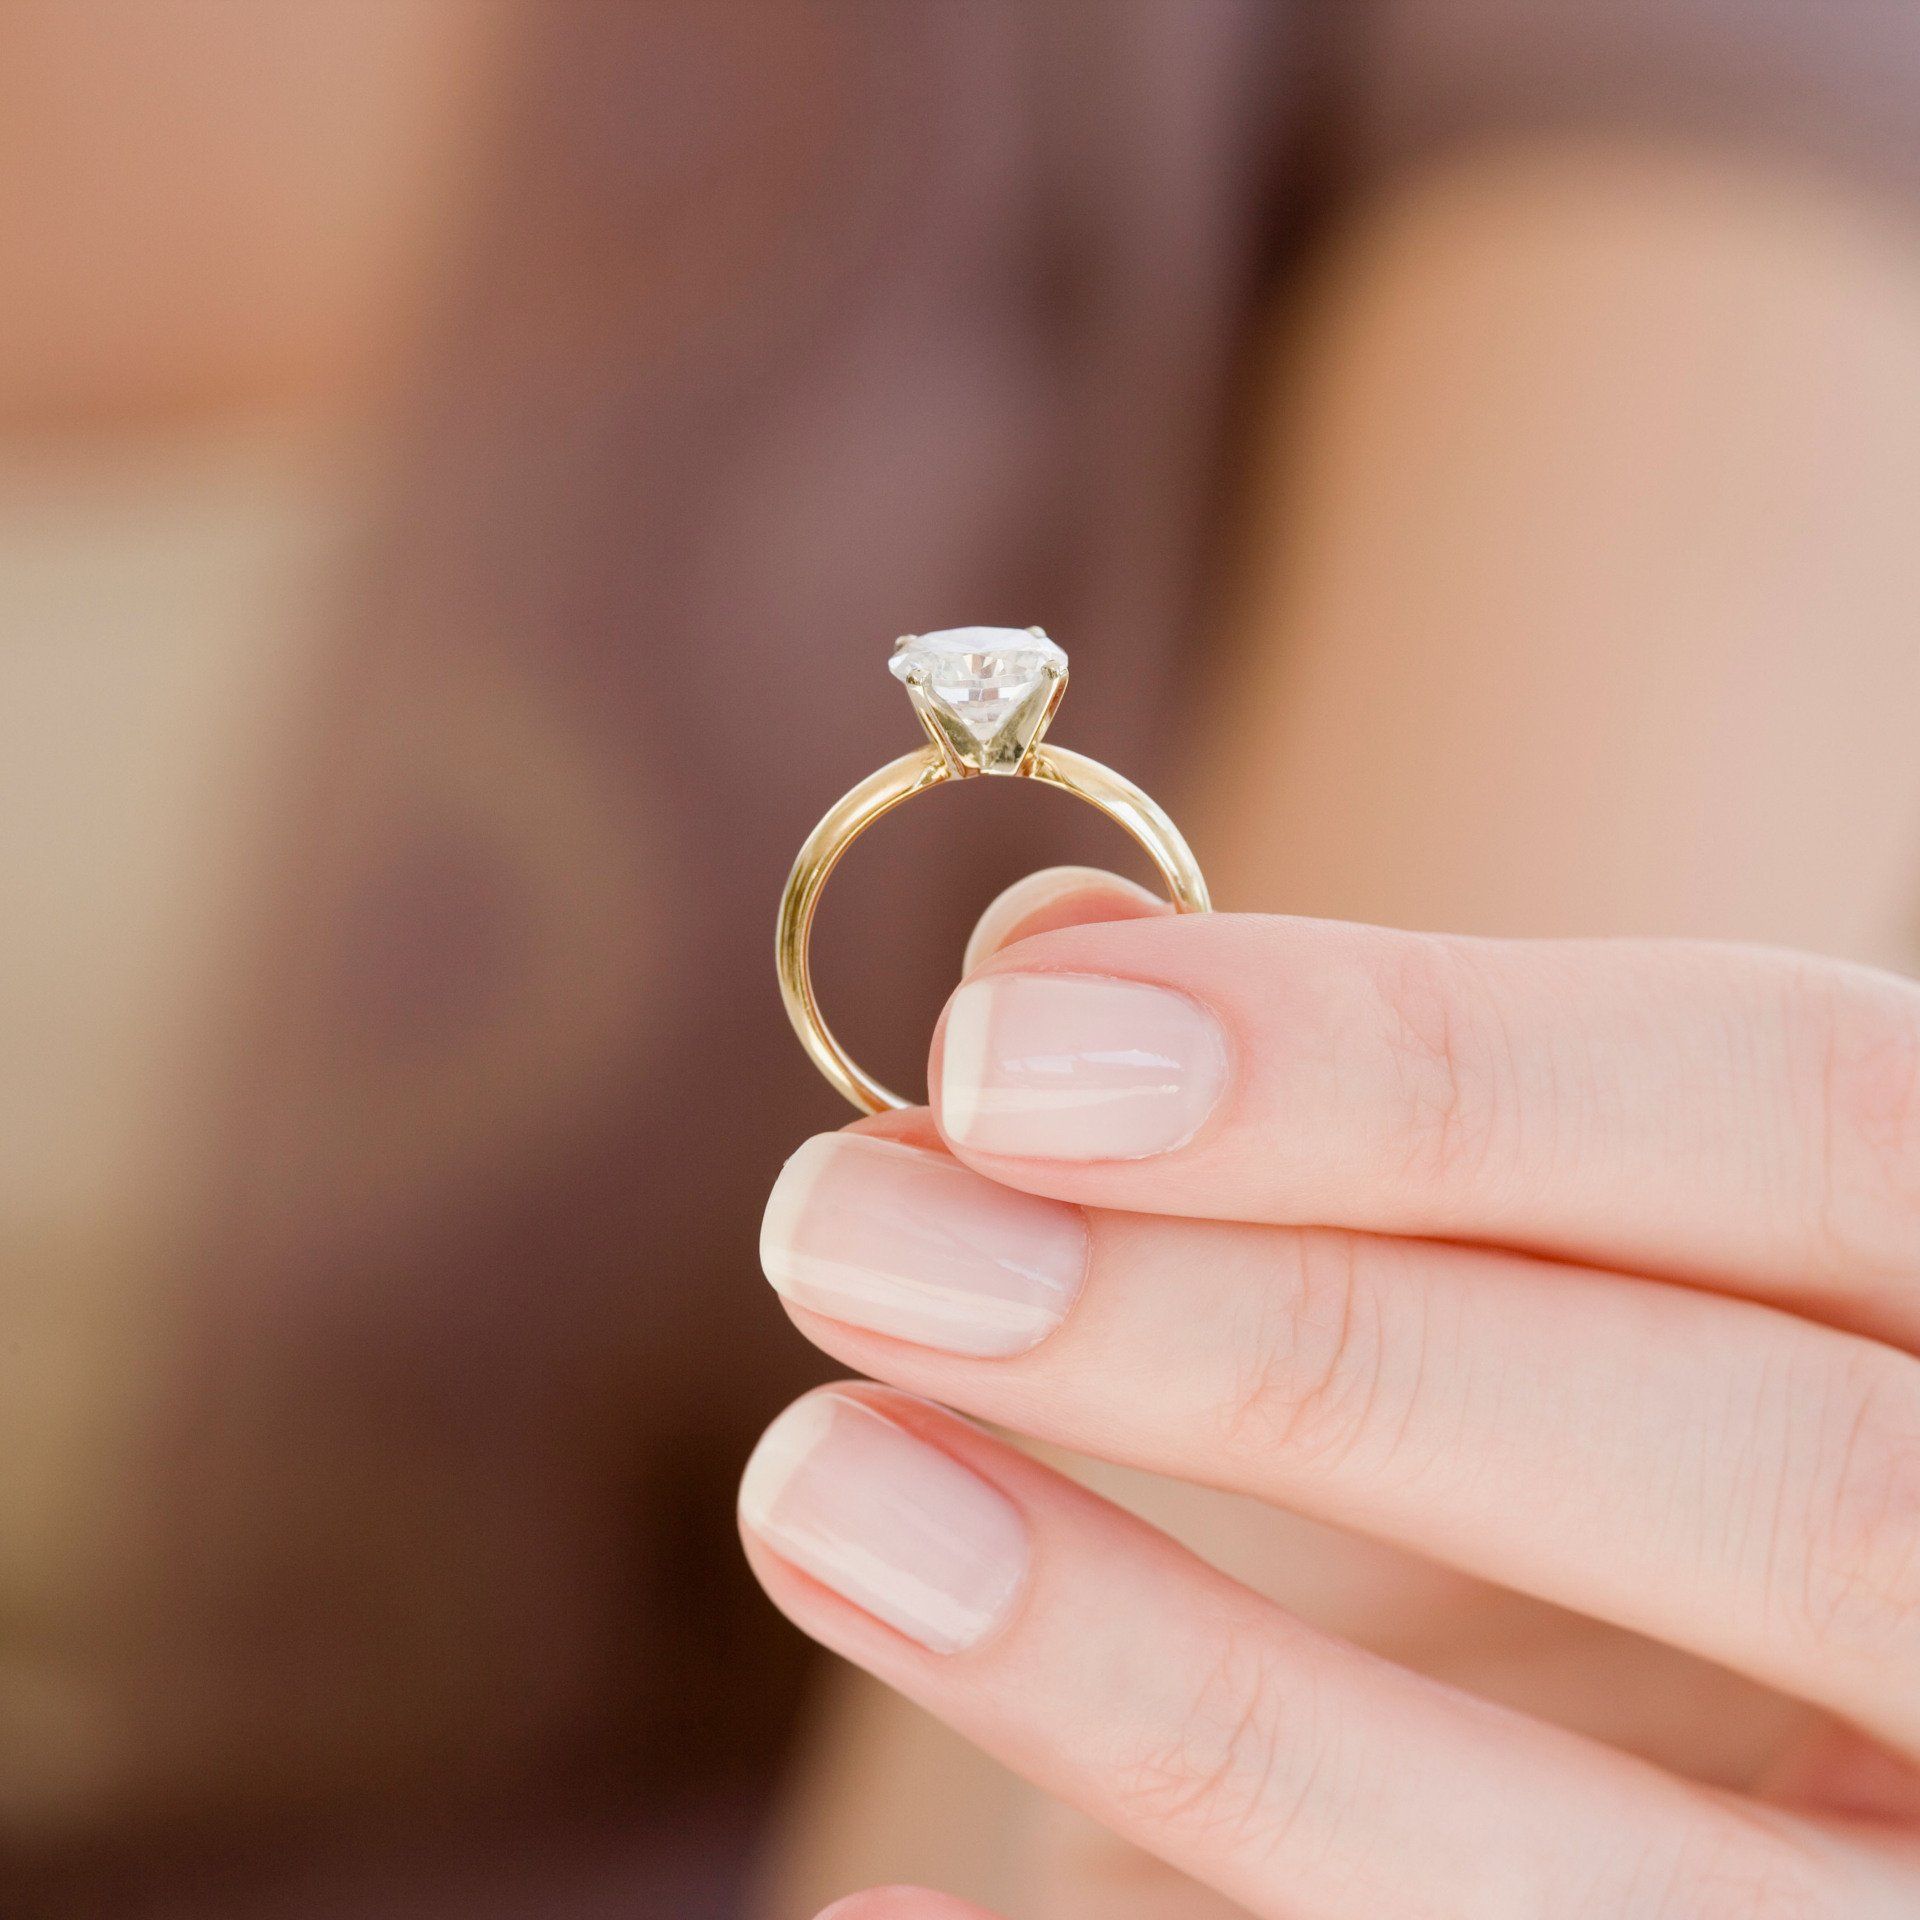 Woman holding engagement ring